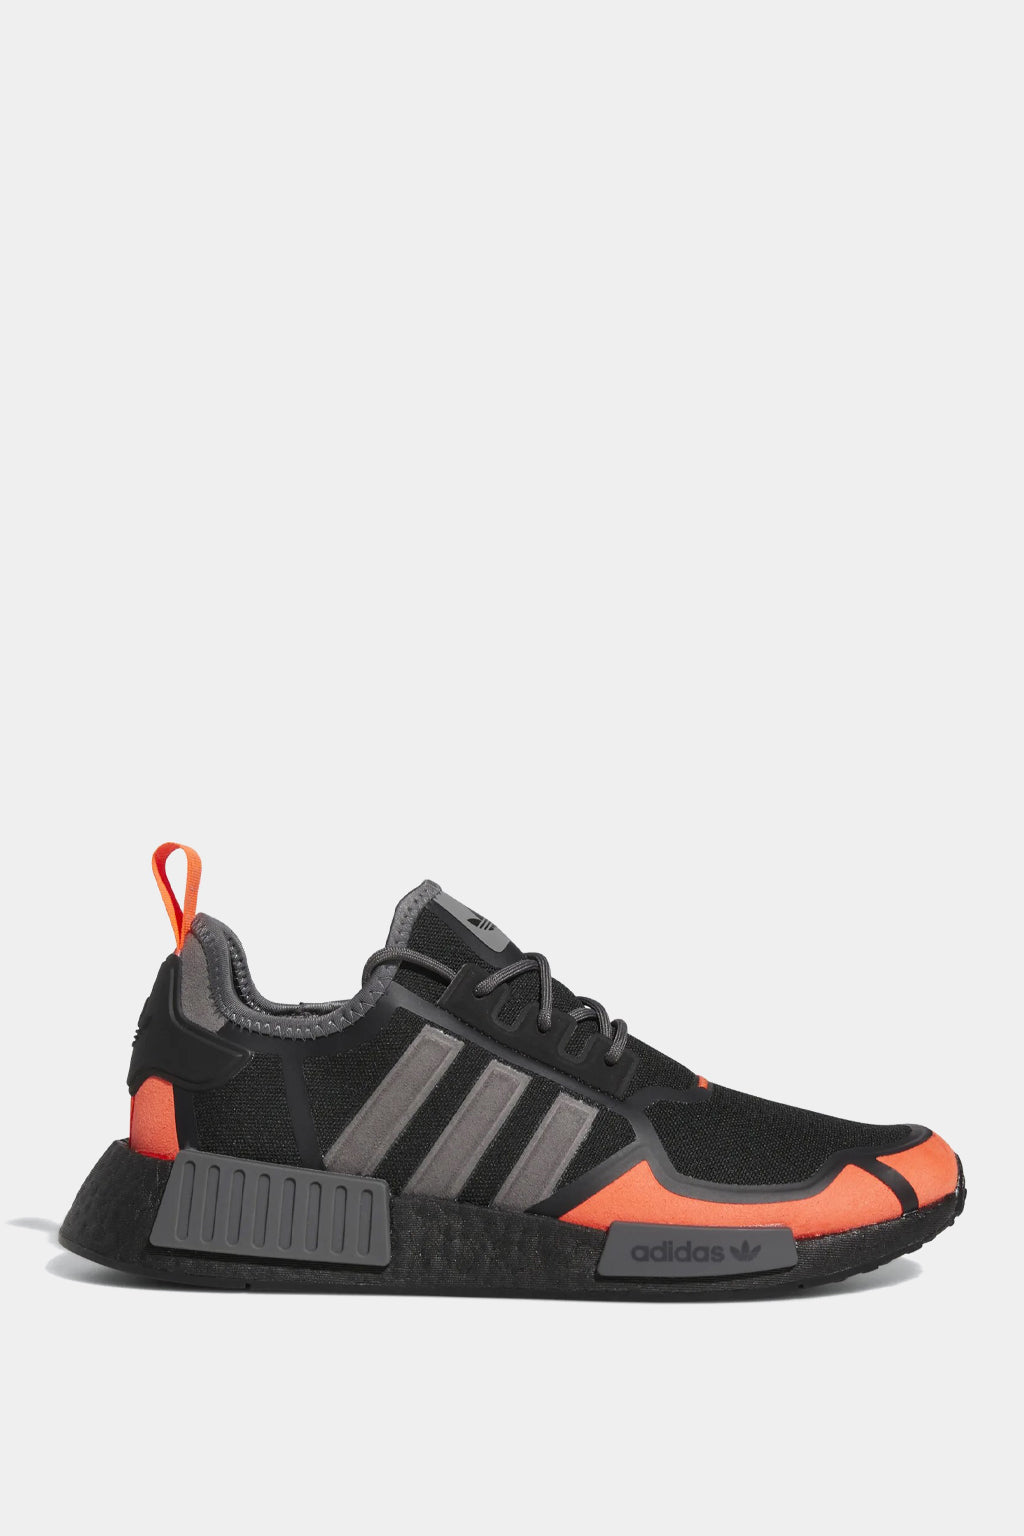 Adidas - Nmd_r1 Shoes